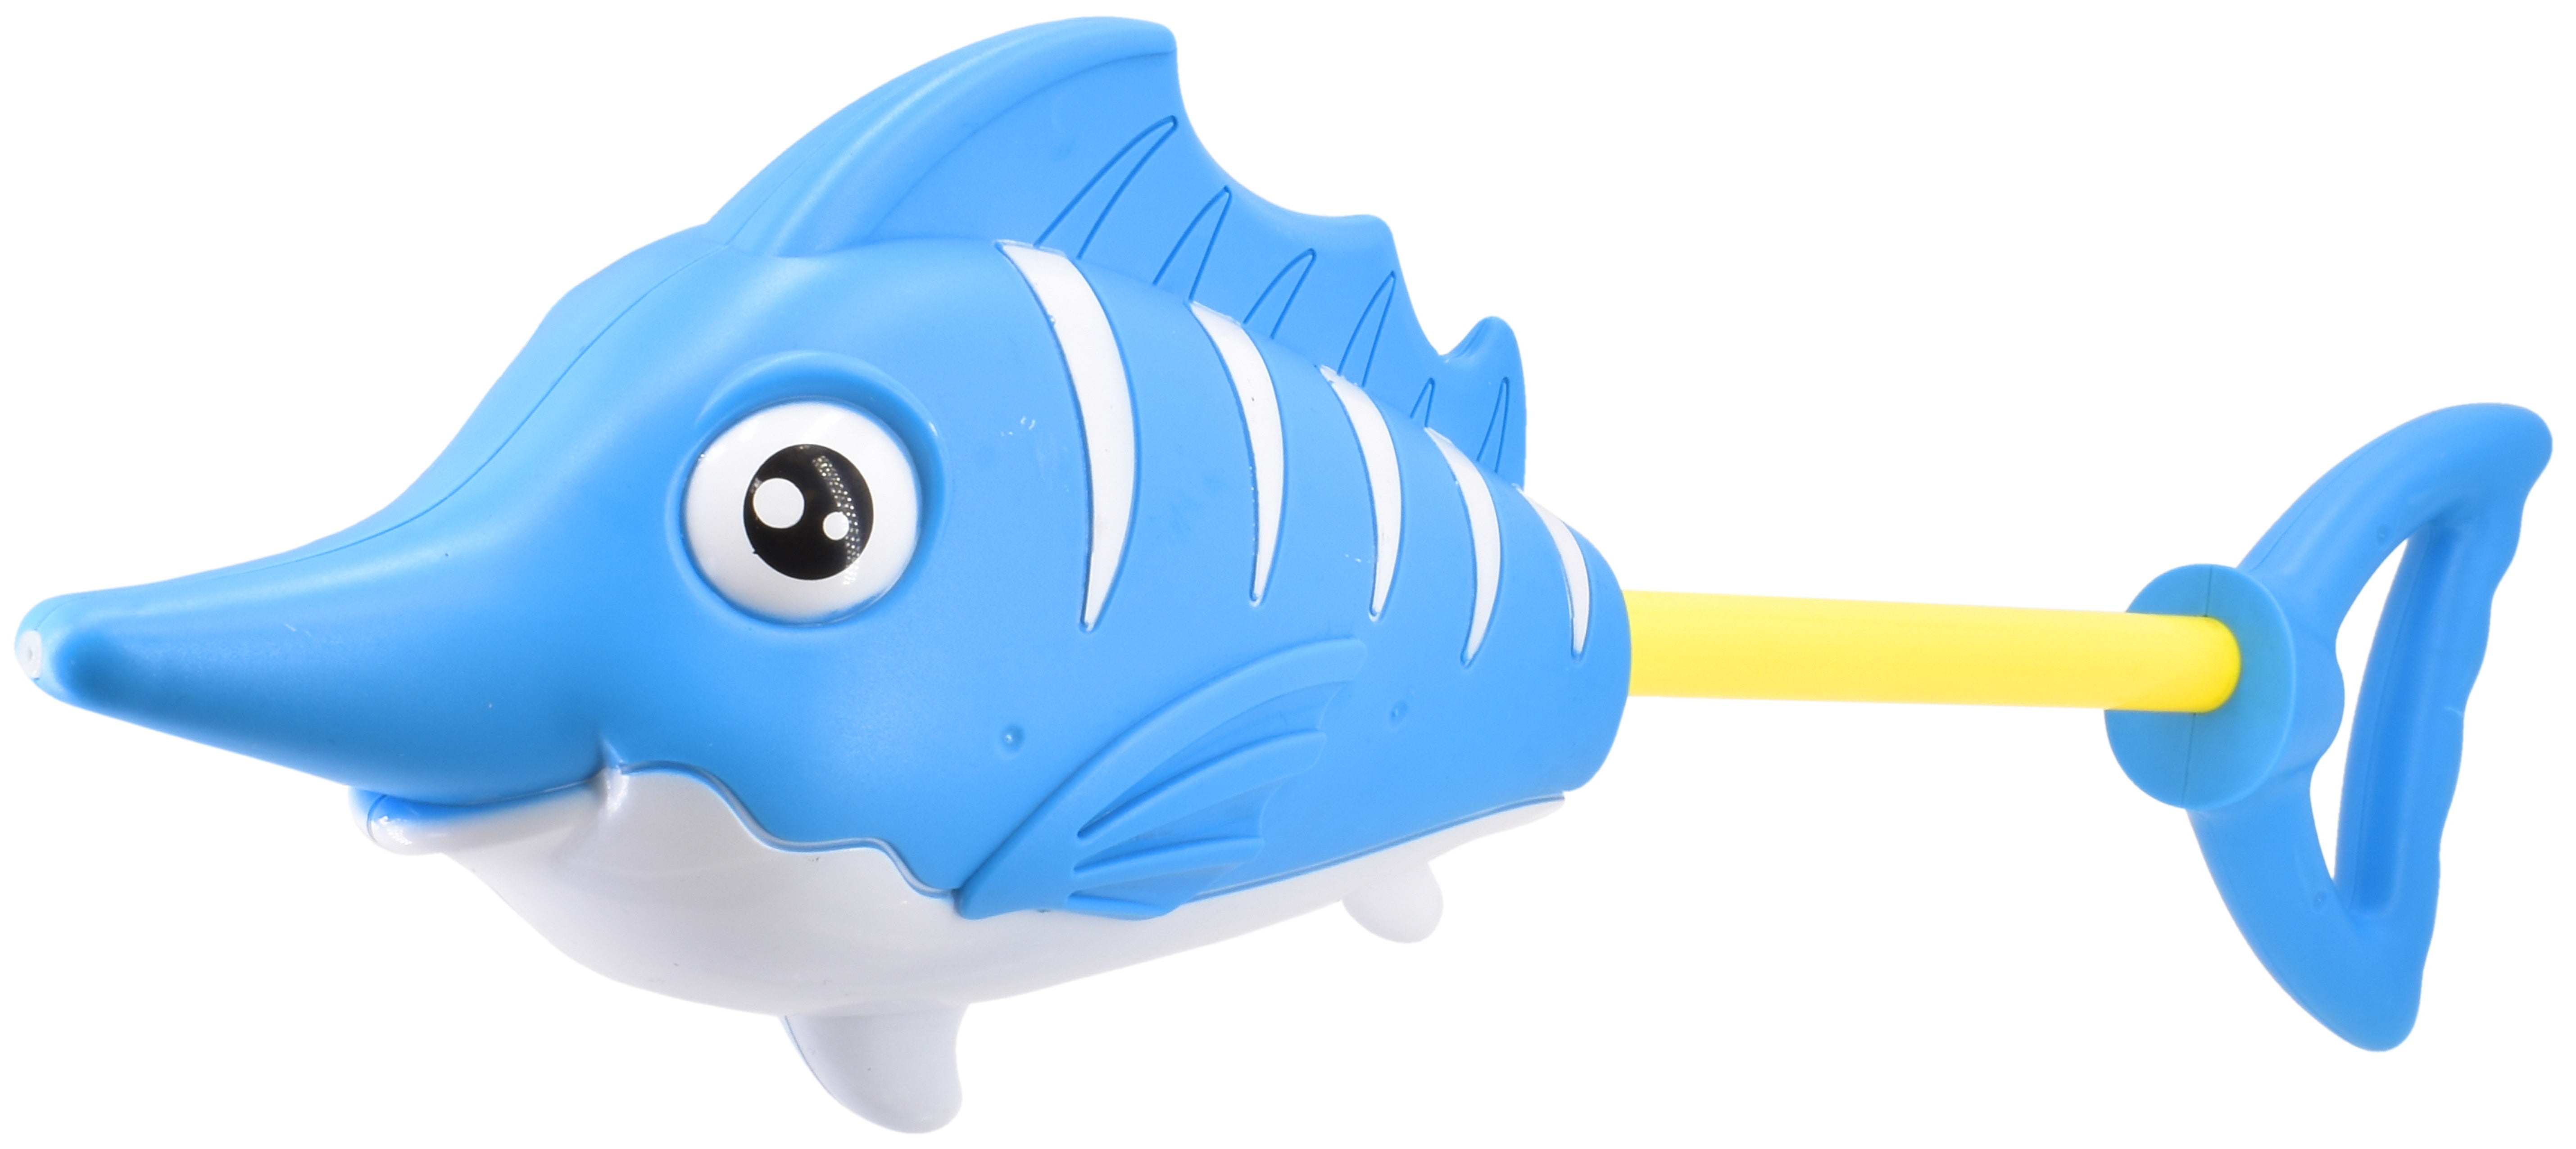 Kandytoys Sea Life Water Squirter 29cm